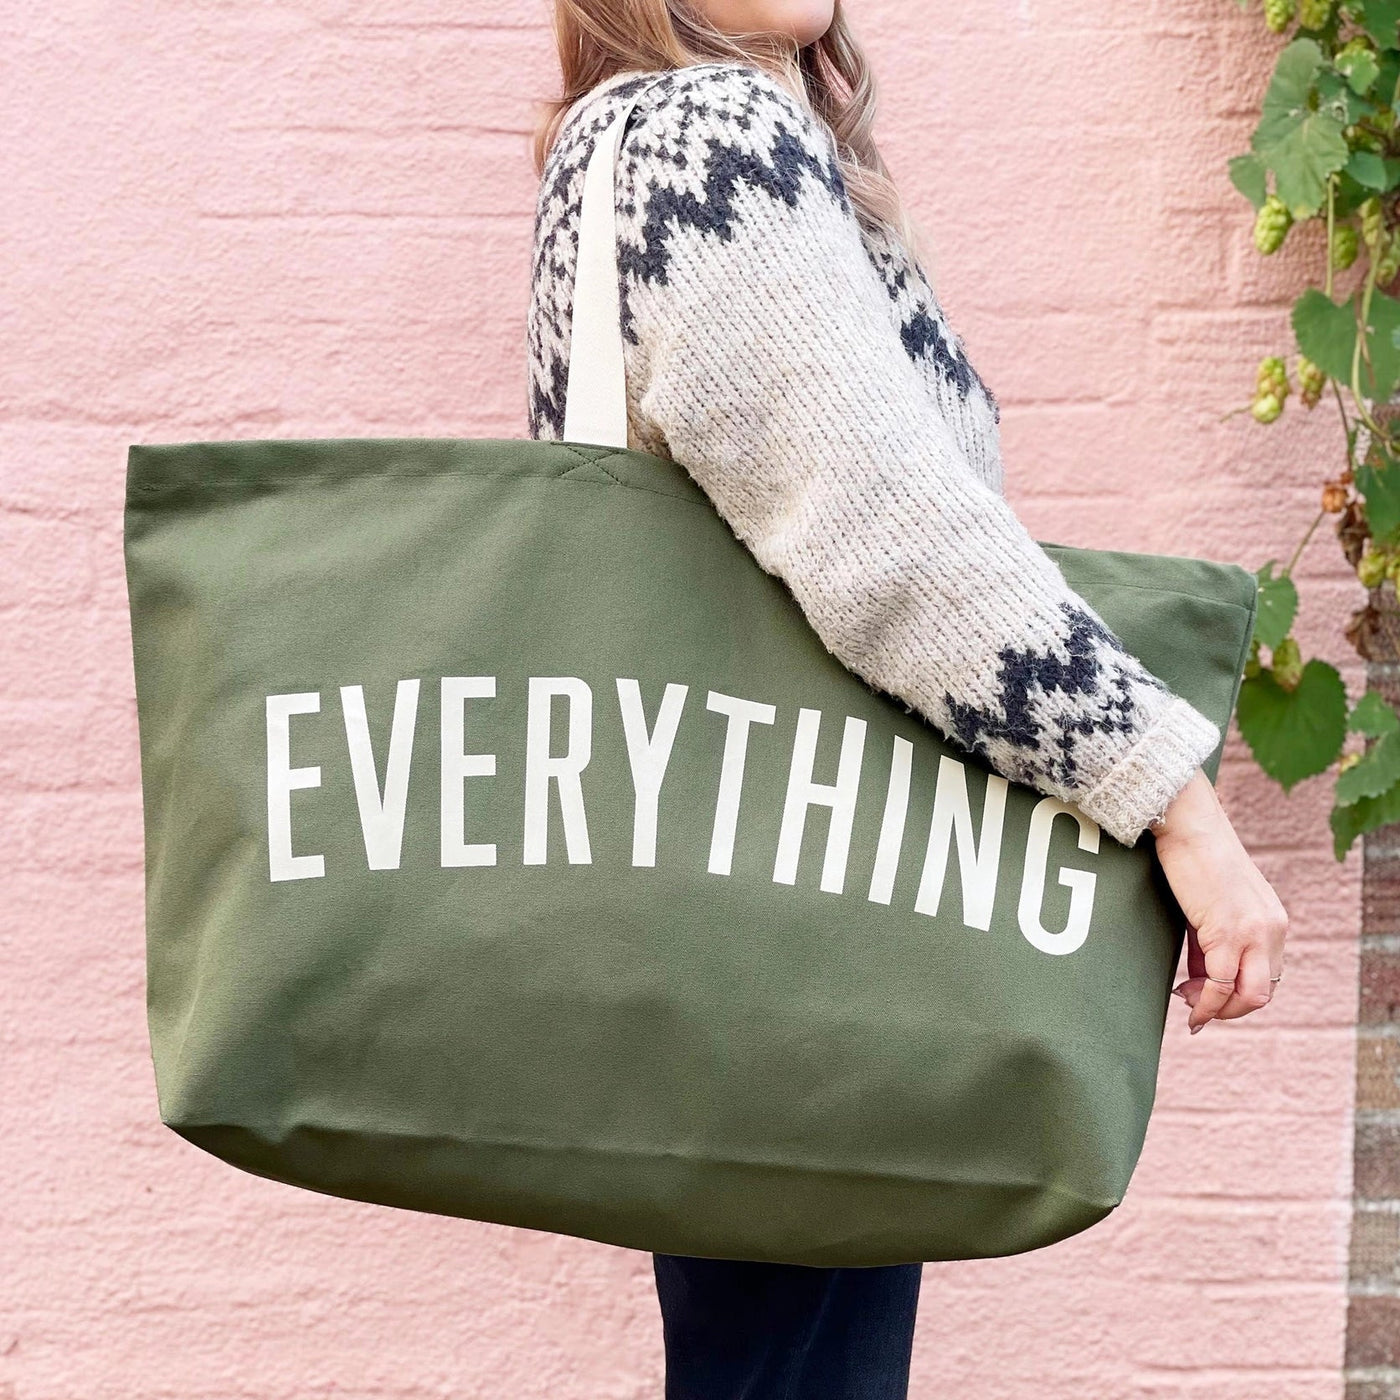 Everything - Olive REALLY Big Bag by Alphabet Bags - Petite Belle